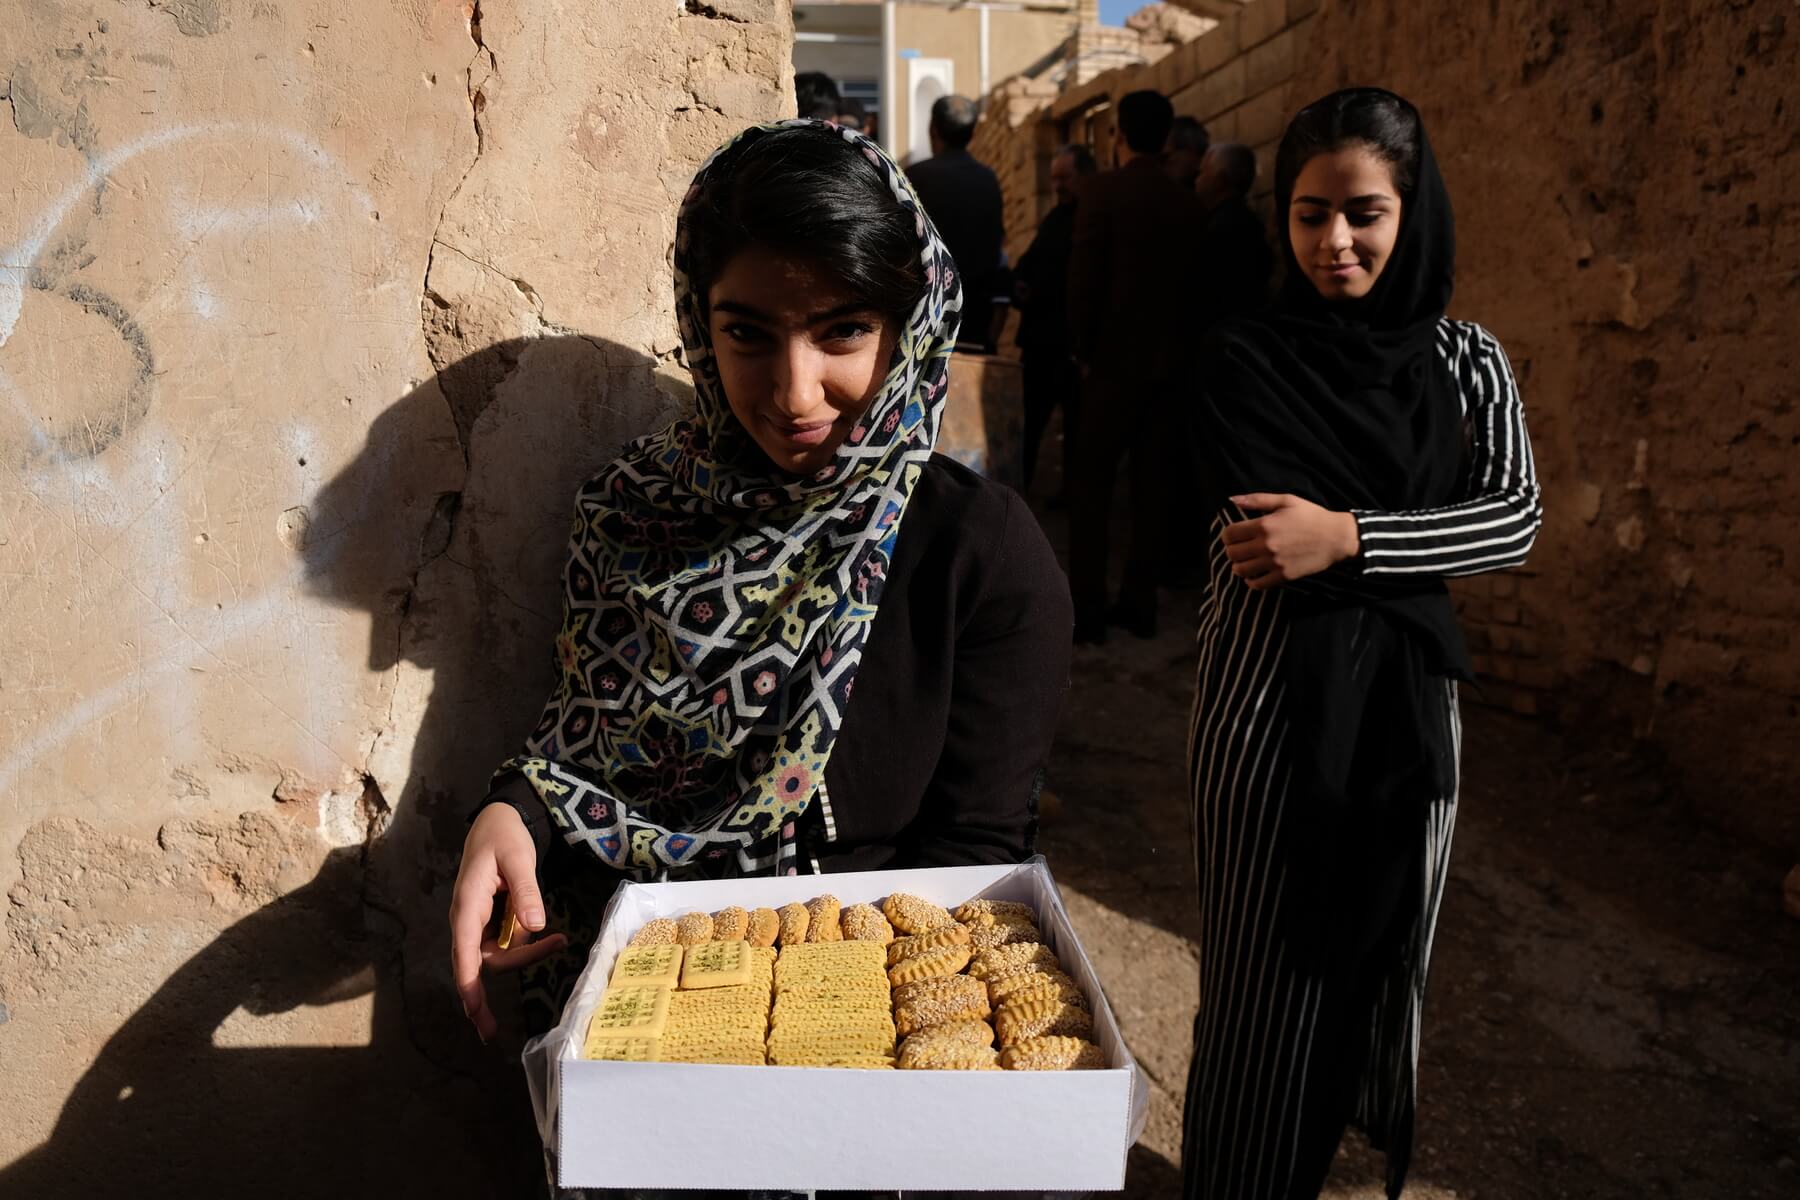 Two Persian woman offering an offbeat traveller some sweets